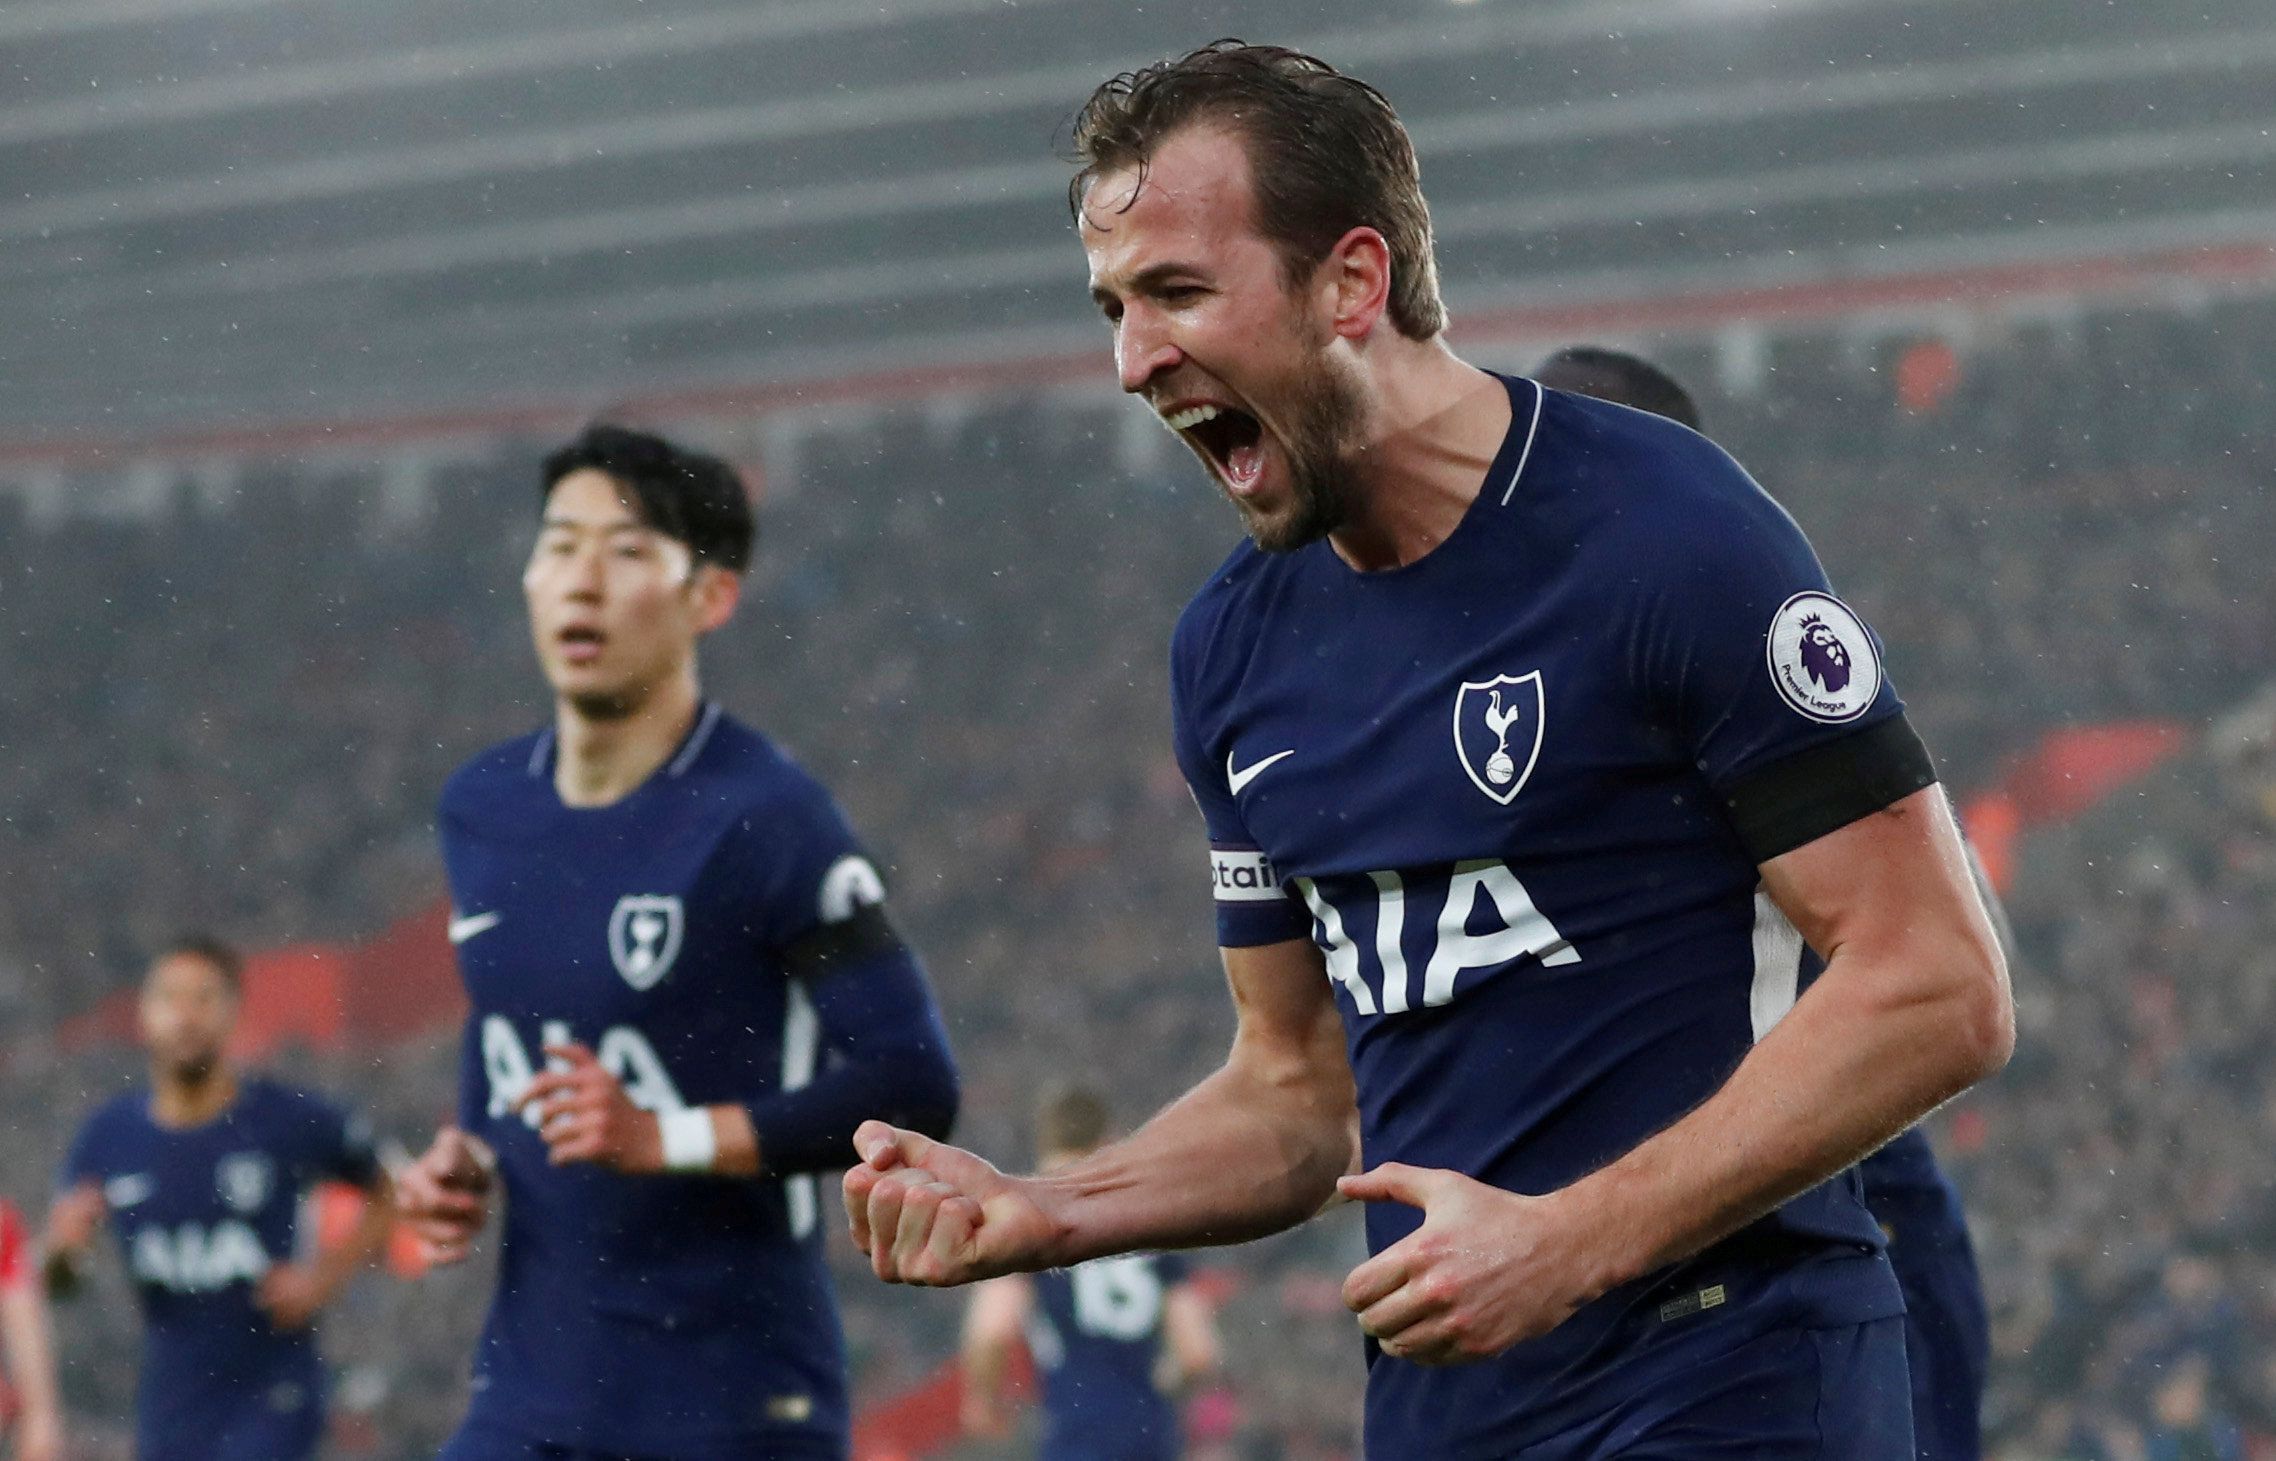 Soccer Football - Premier League - Southampton vs Tottenham Hotspur - St Mary's Stadium, Southampton, Britain - January 21, 2018   Tottenham's Harry Kane celebrates scoring their first goal      Action Images via Reuters/Matthew Childs    EDITORIAL USE ONLY. No use with unauthorized audio, video, data, fixture lists, club/league logos or 